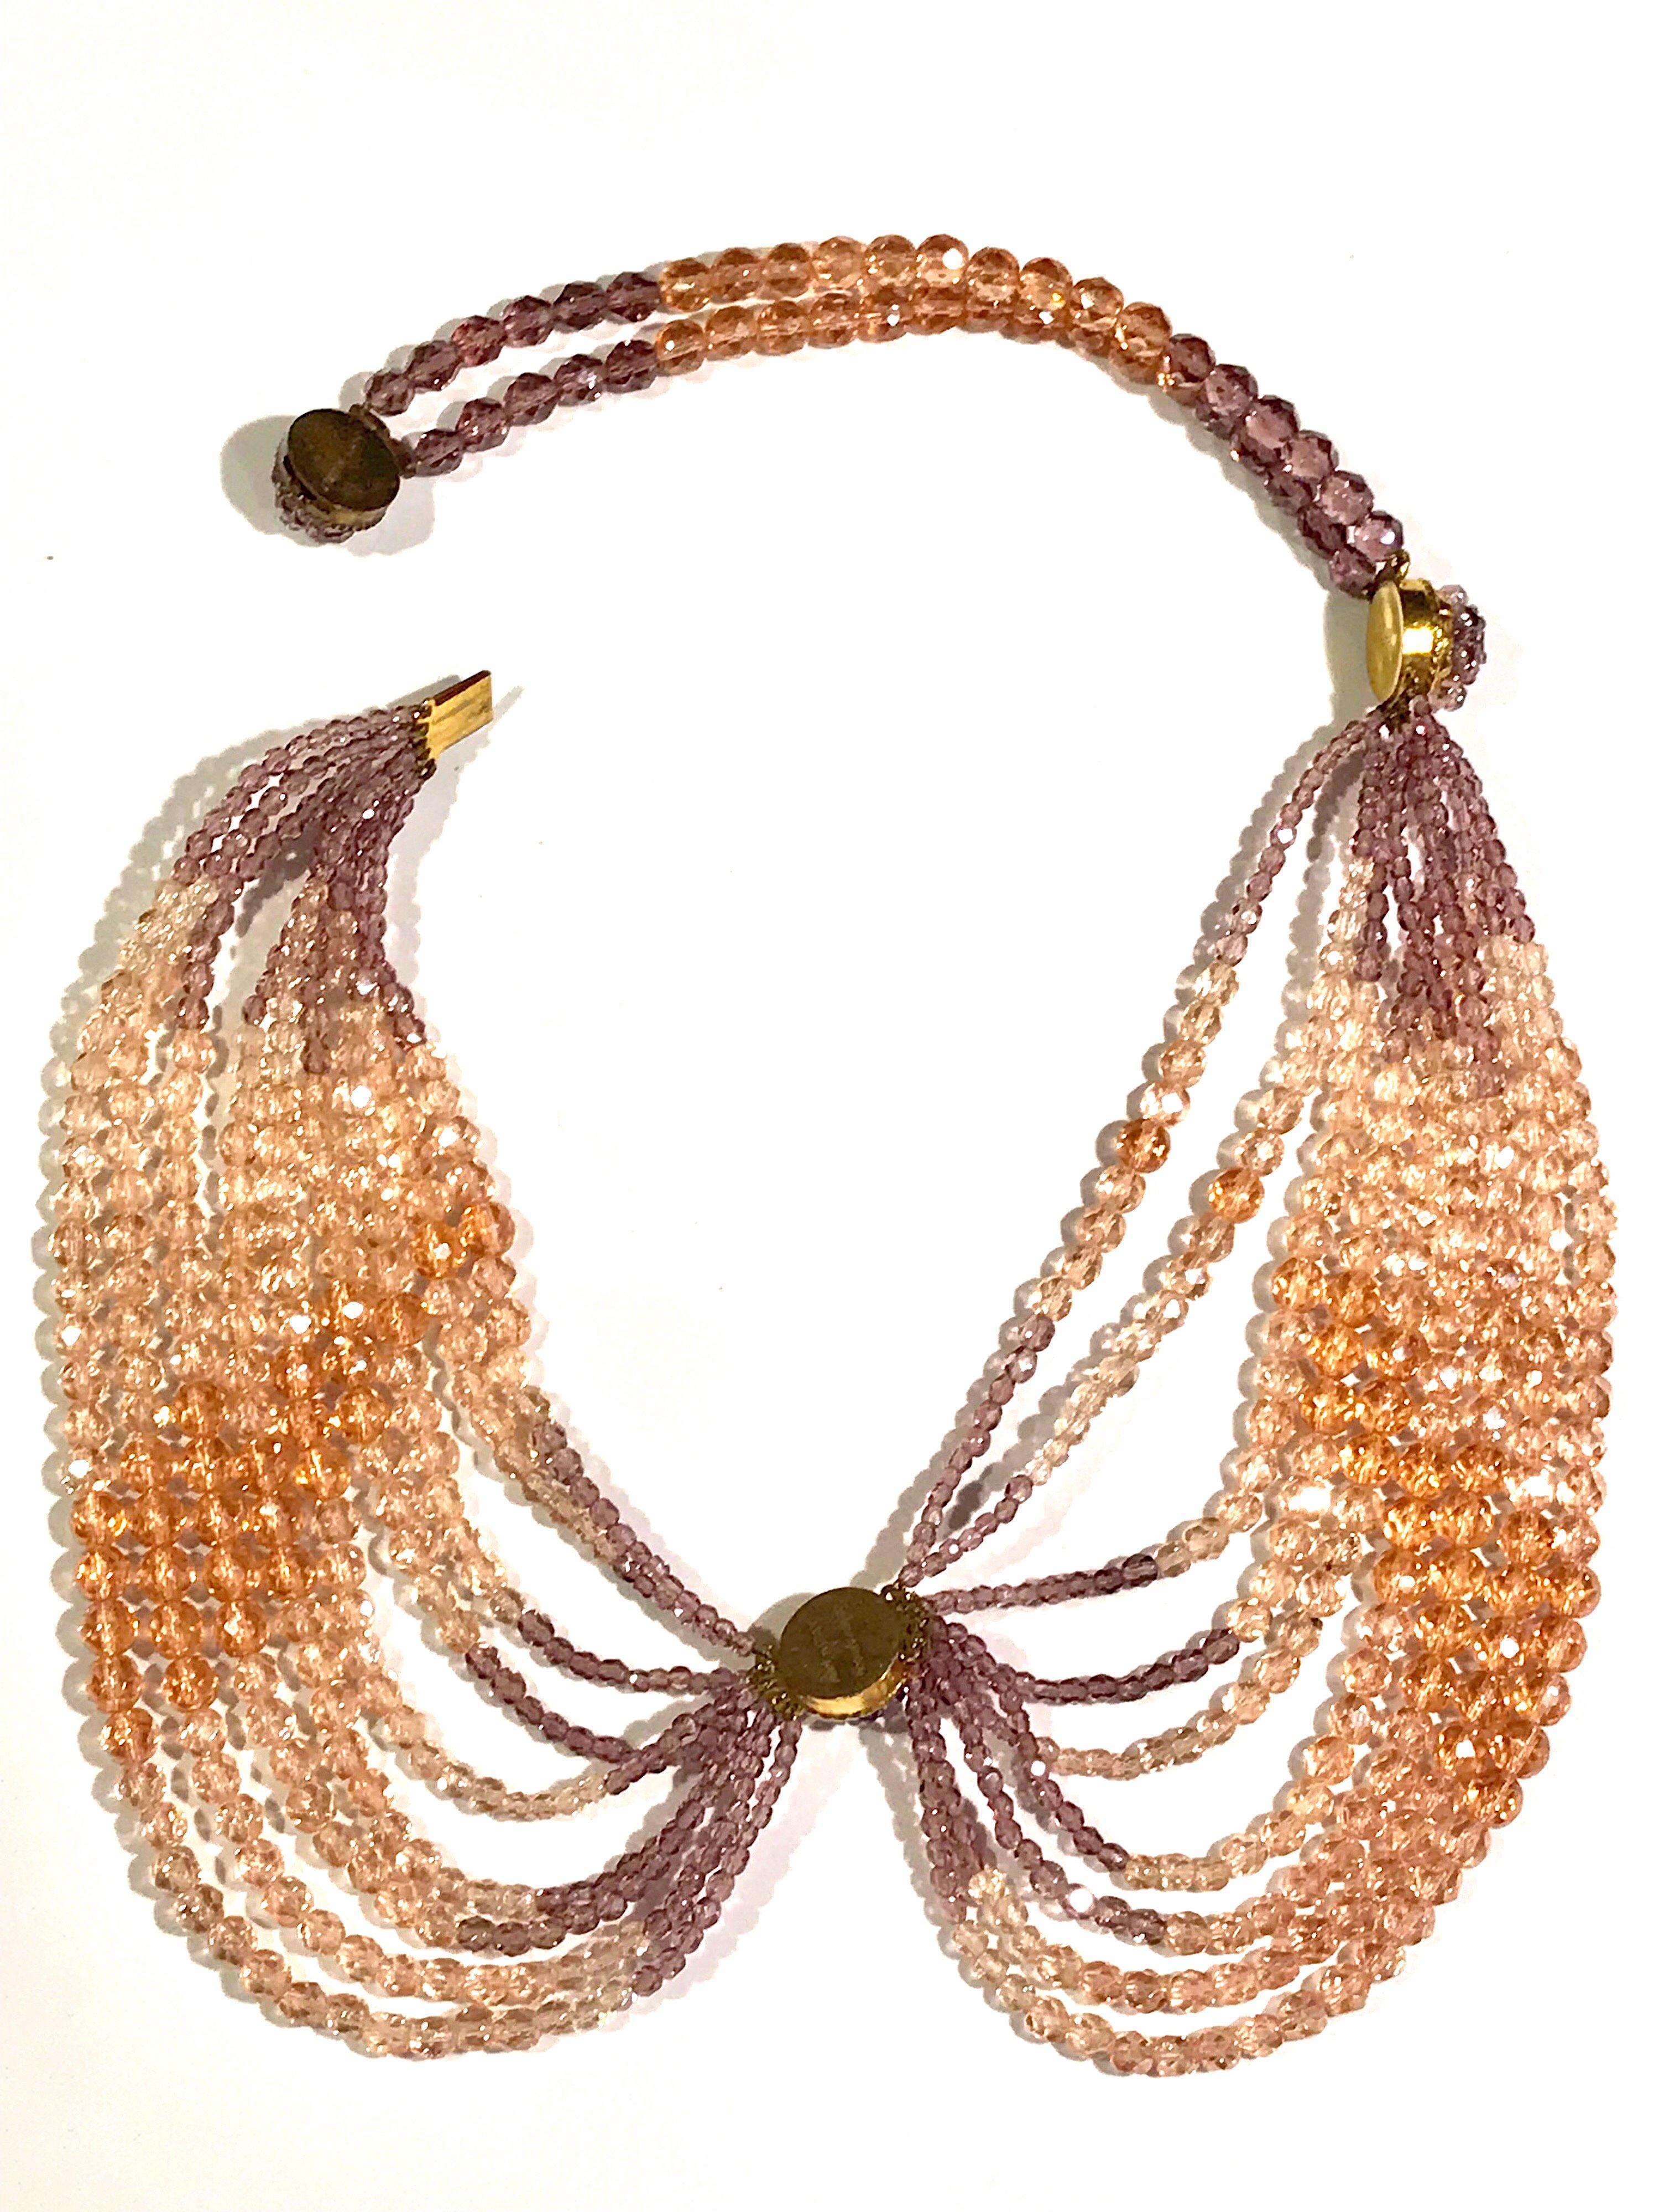 A lovely crystal bead swag necklace by Coppola e Toppo for designer Ken Scott from the 1960s. The crystals are graduated in size from the smallest approximately 3 mm to the largest approximately 7 mm. There are two shades of pastel pink / coral